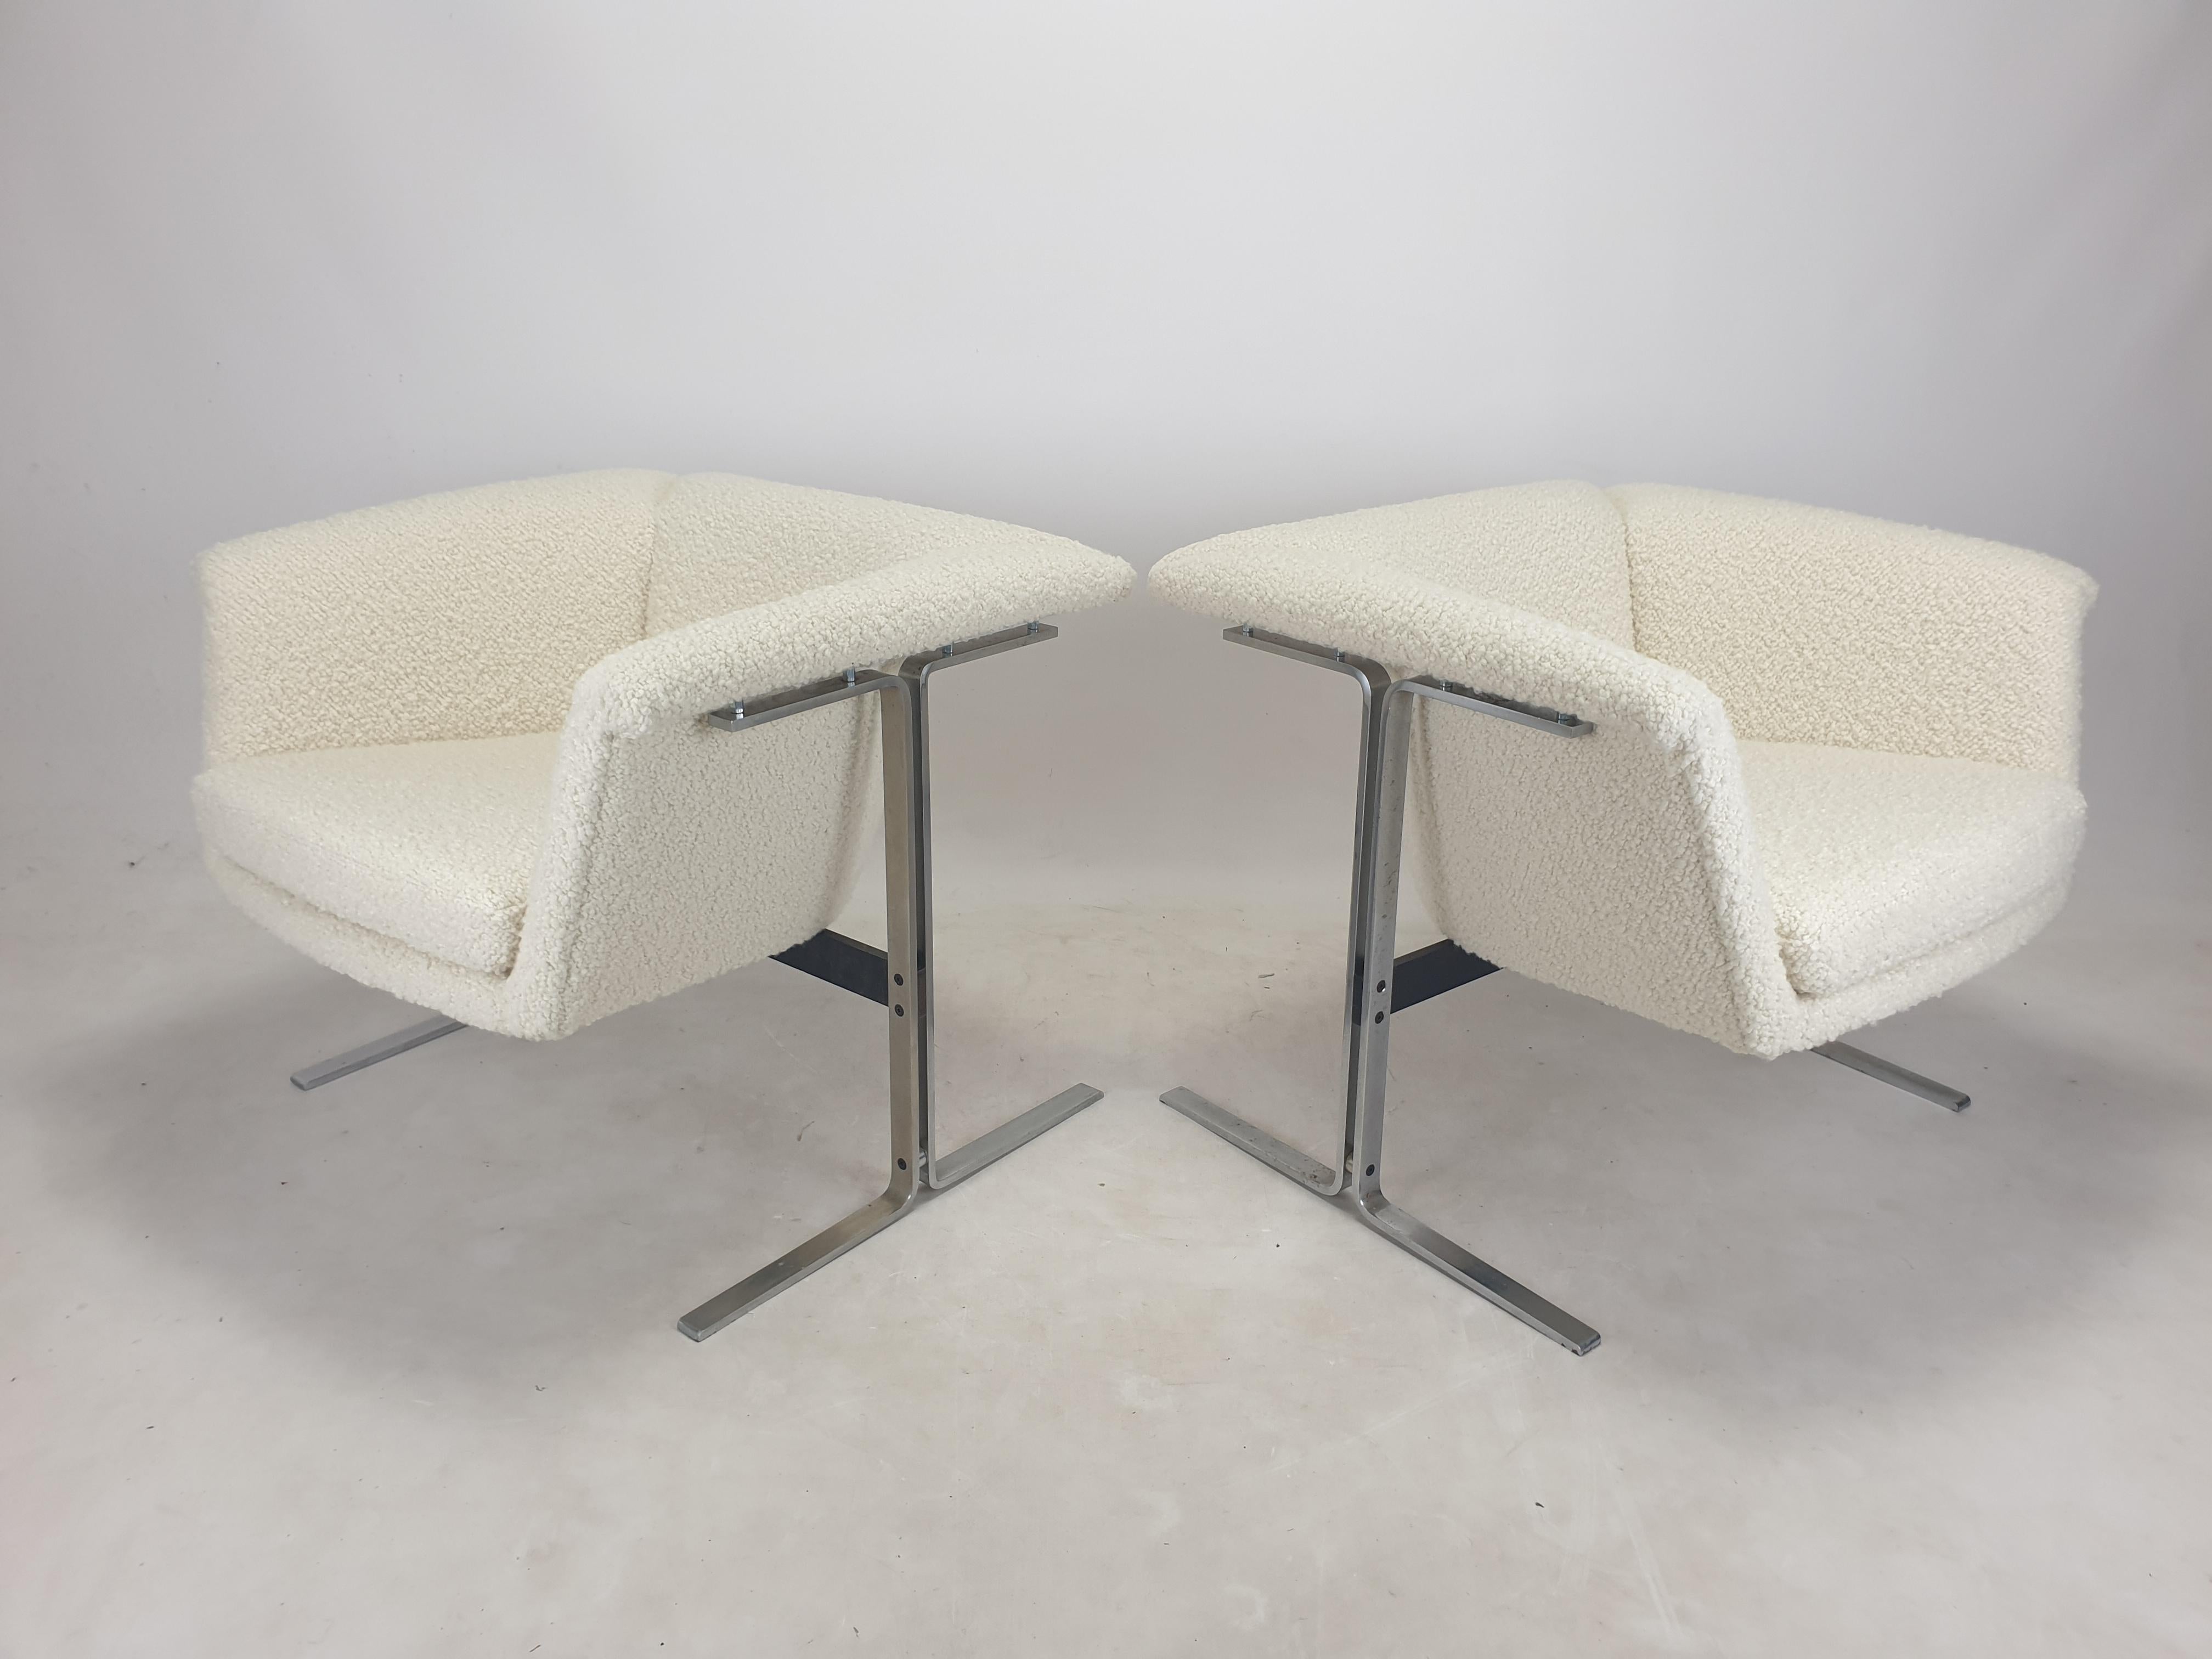 A very nice pair of model 042 chairs designed by Geoffrey Harcourt in 1963 for Artifort.

Harcourt's iconic 042 chairs were featured in Stanley Kubrik's seminal film 